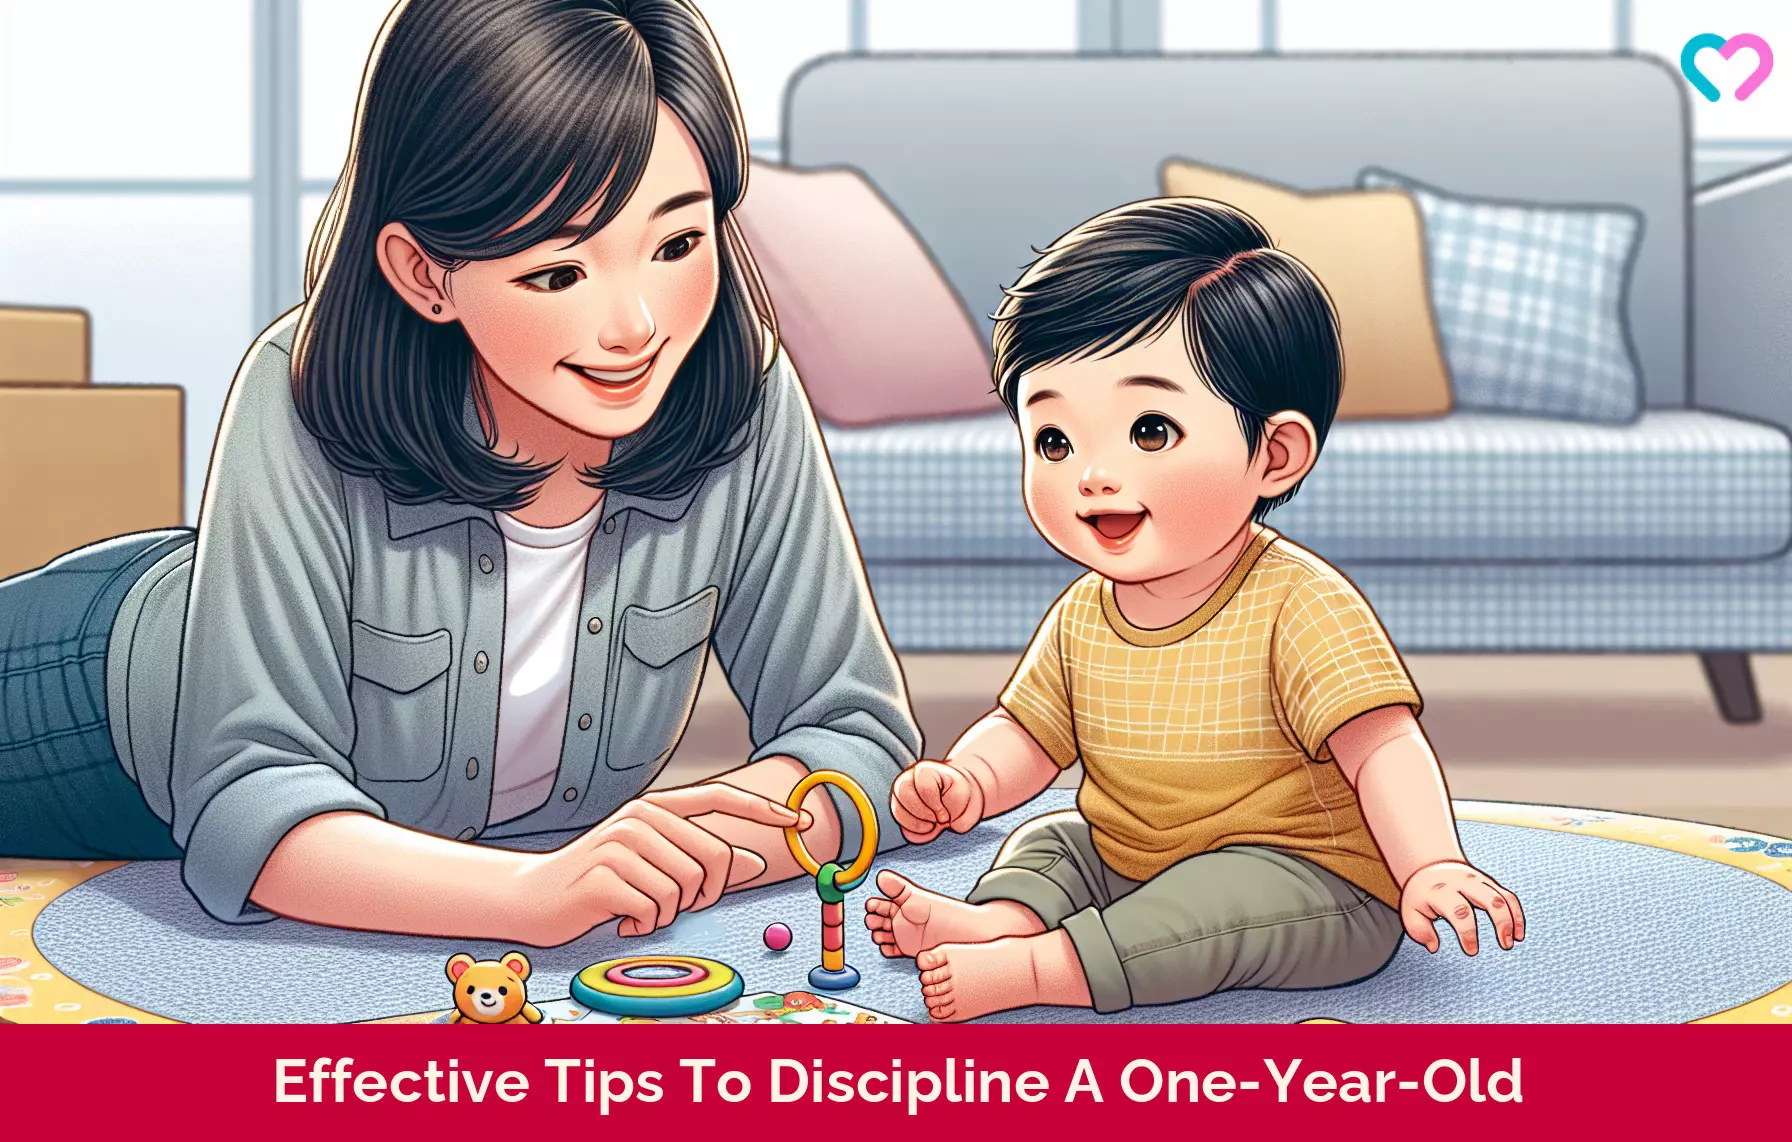 How To Discipline A One-Year-Old_illustration